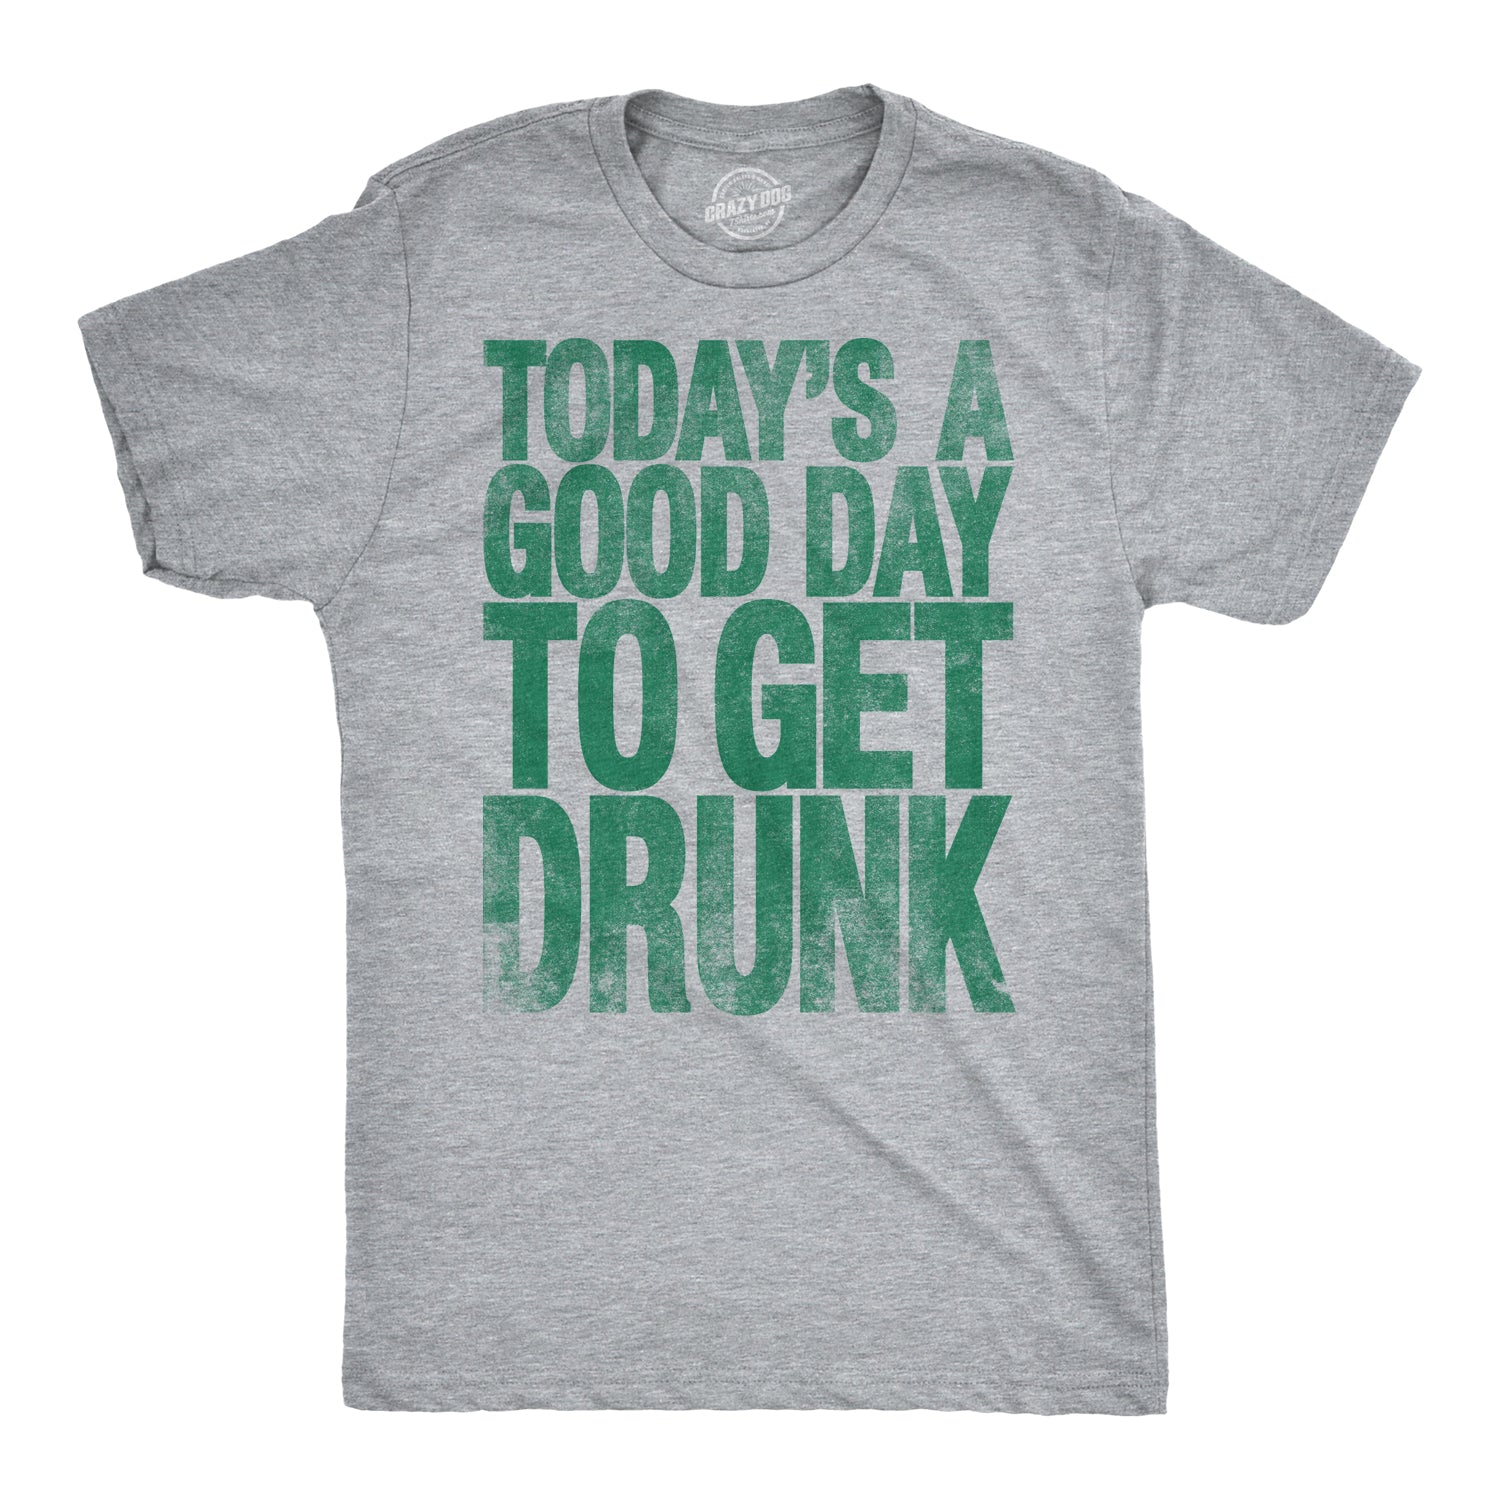 Funny Light Heather Grey - Good Day Good Day To Get Drunk Mens T Shirt Nerdy Saint Patrick's Day Beer Drinking Tee